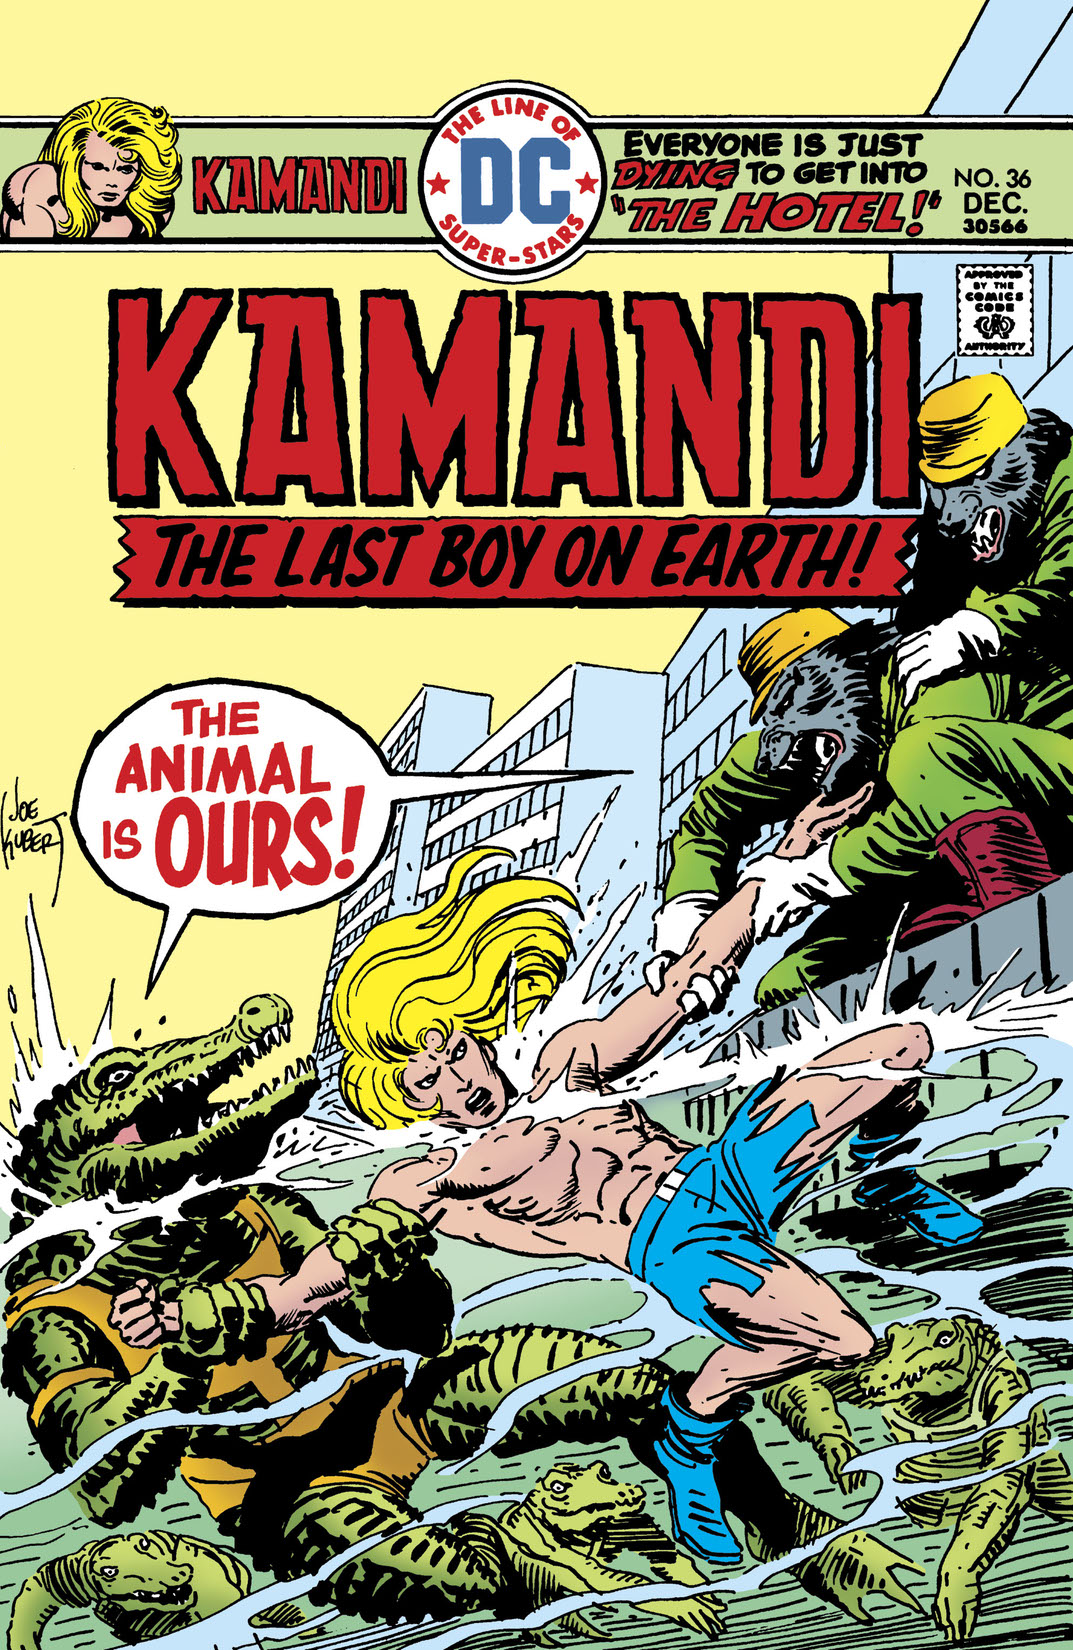 Kamandi: The Last Boy on Earth #36 preview images